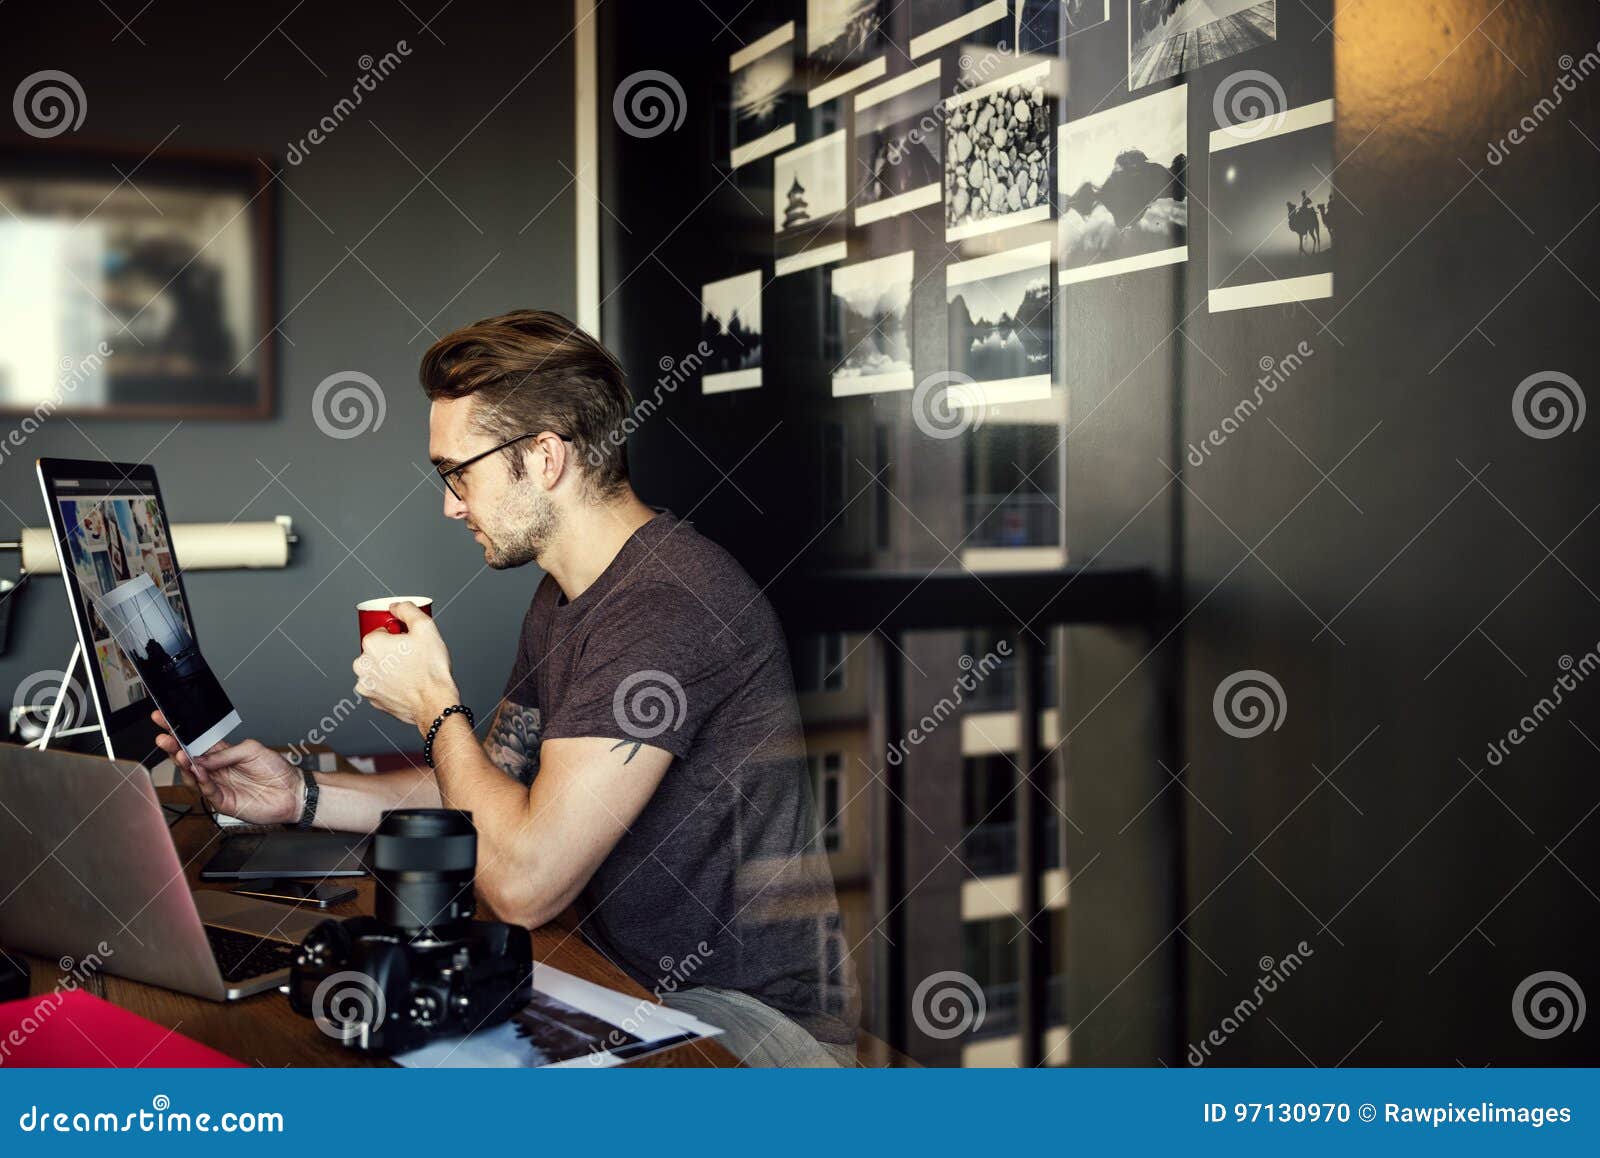 man busy photographer editing home office concept